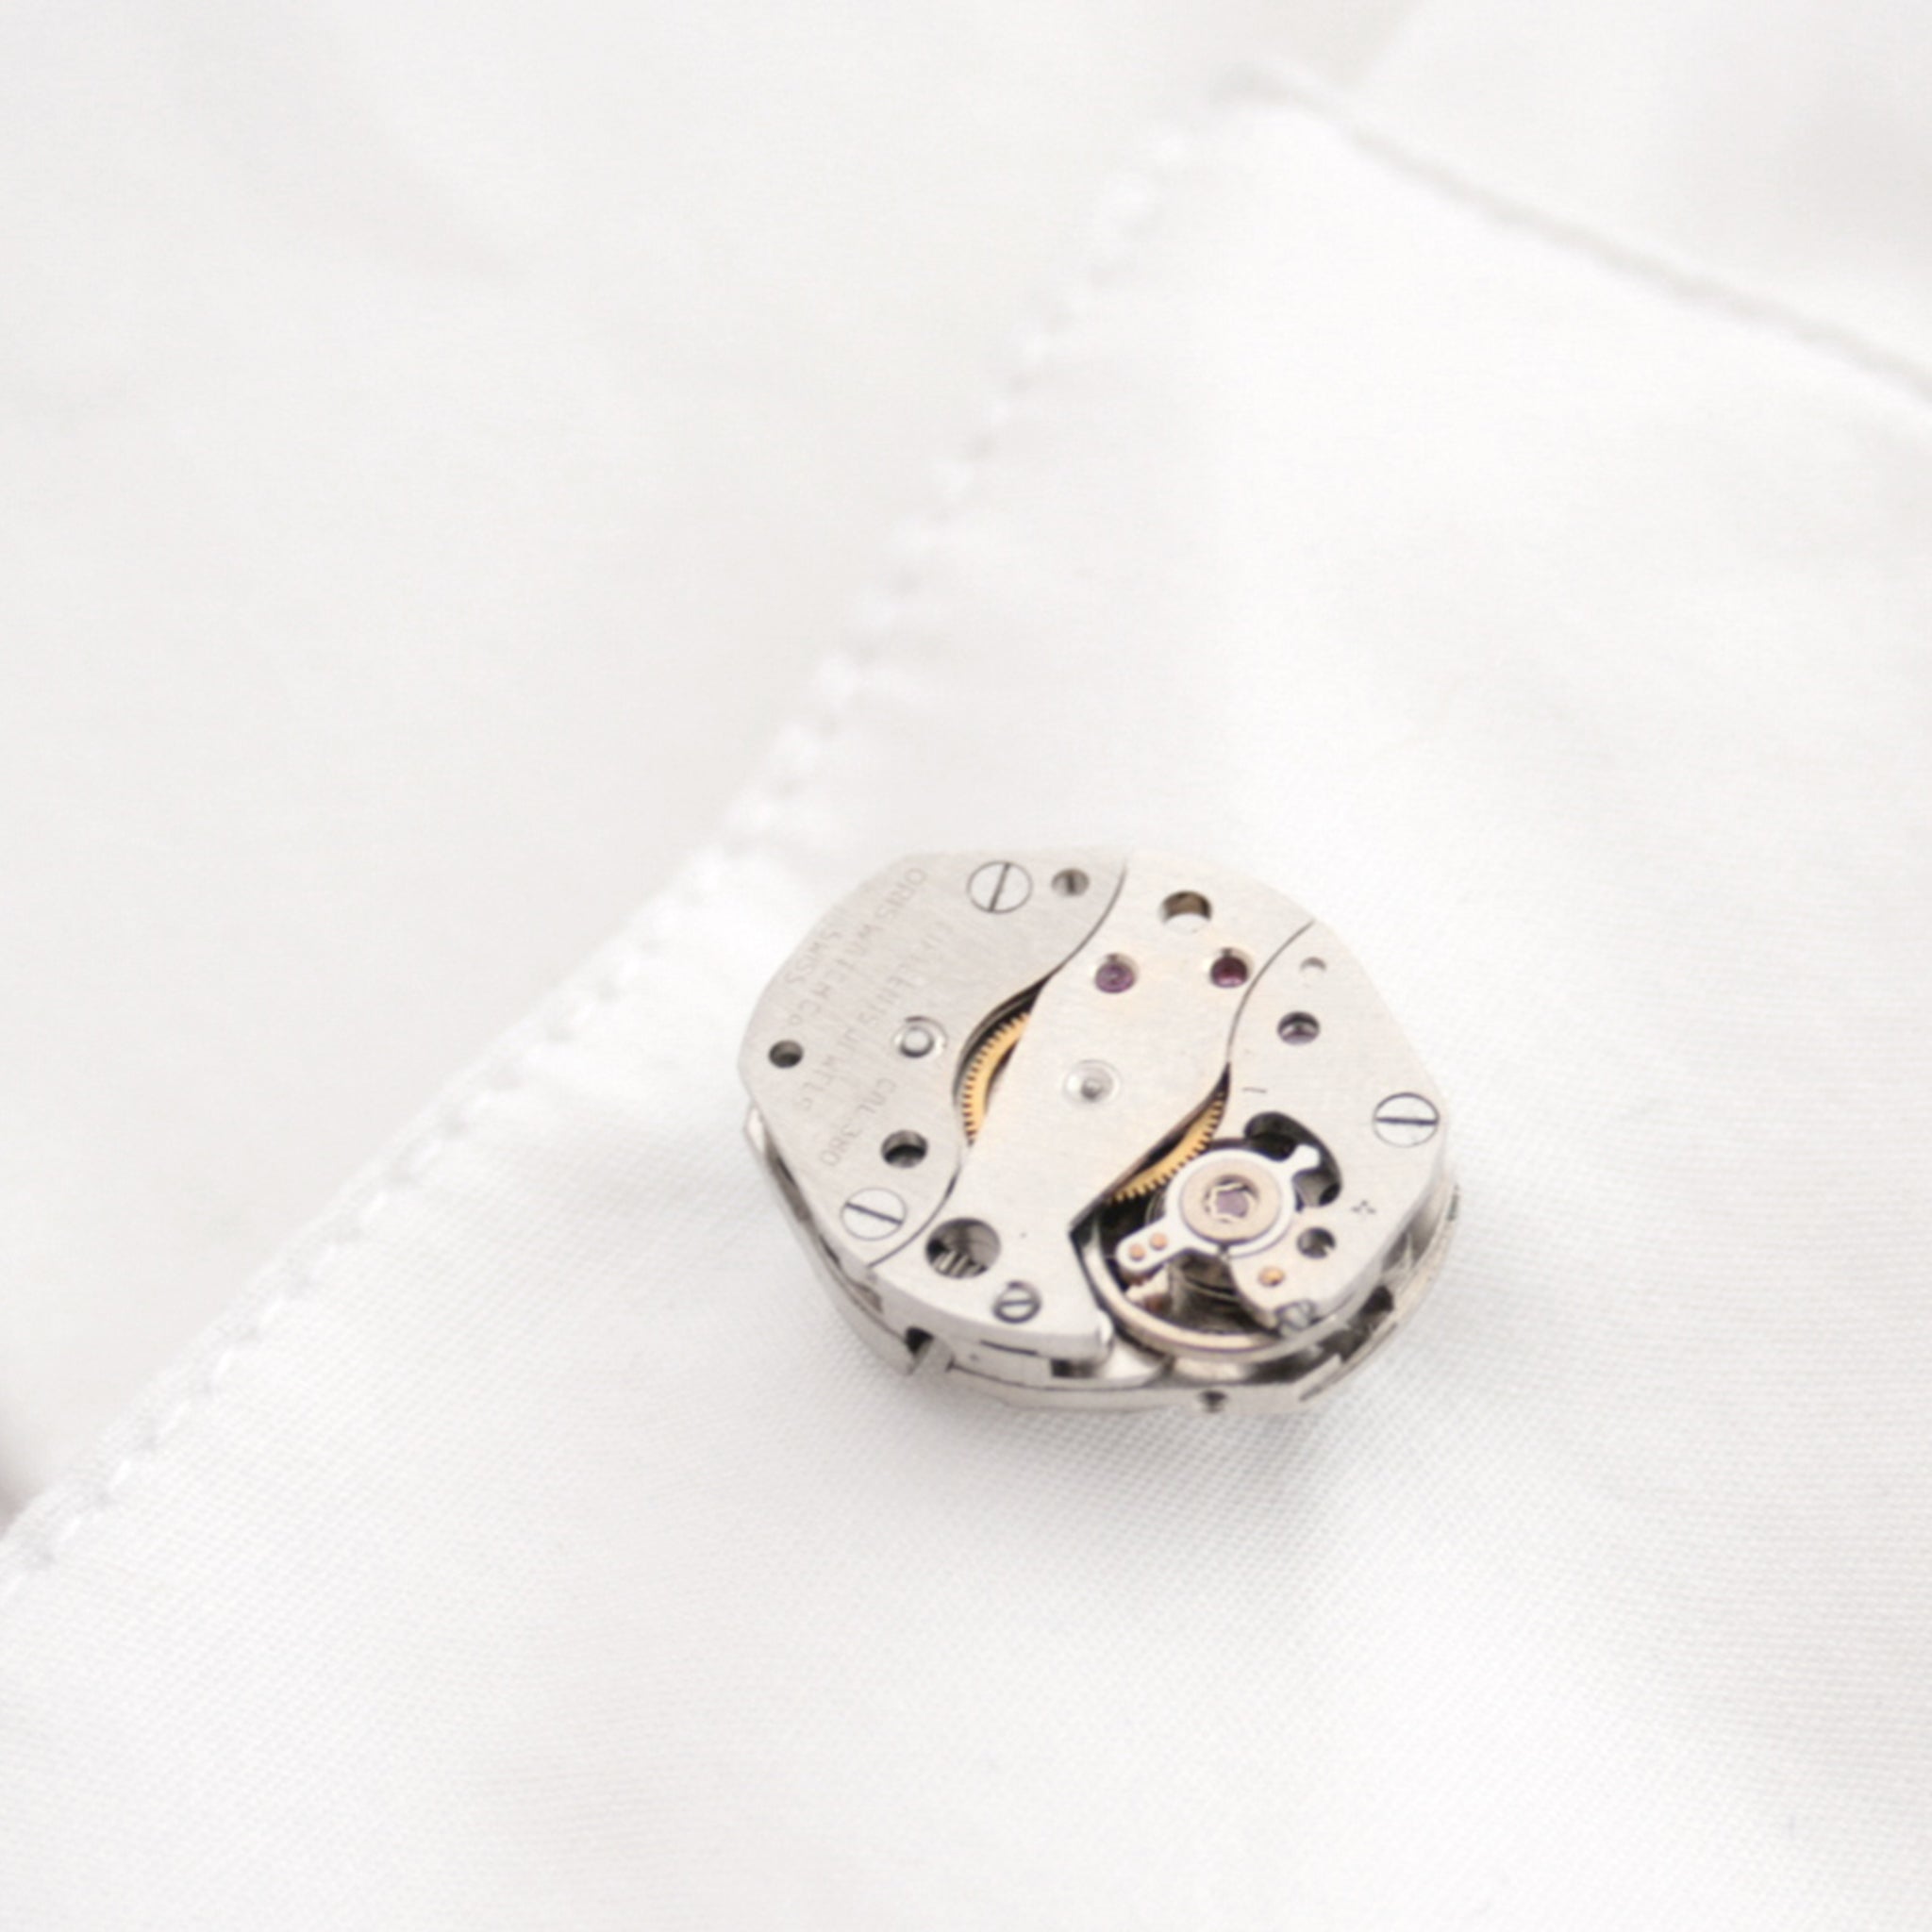 cool watch cufflinks for men featuring antique movements in shirt's cuff